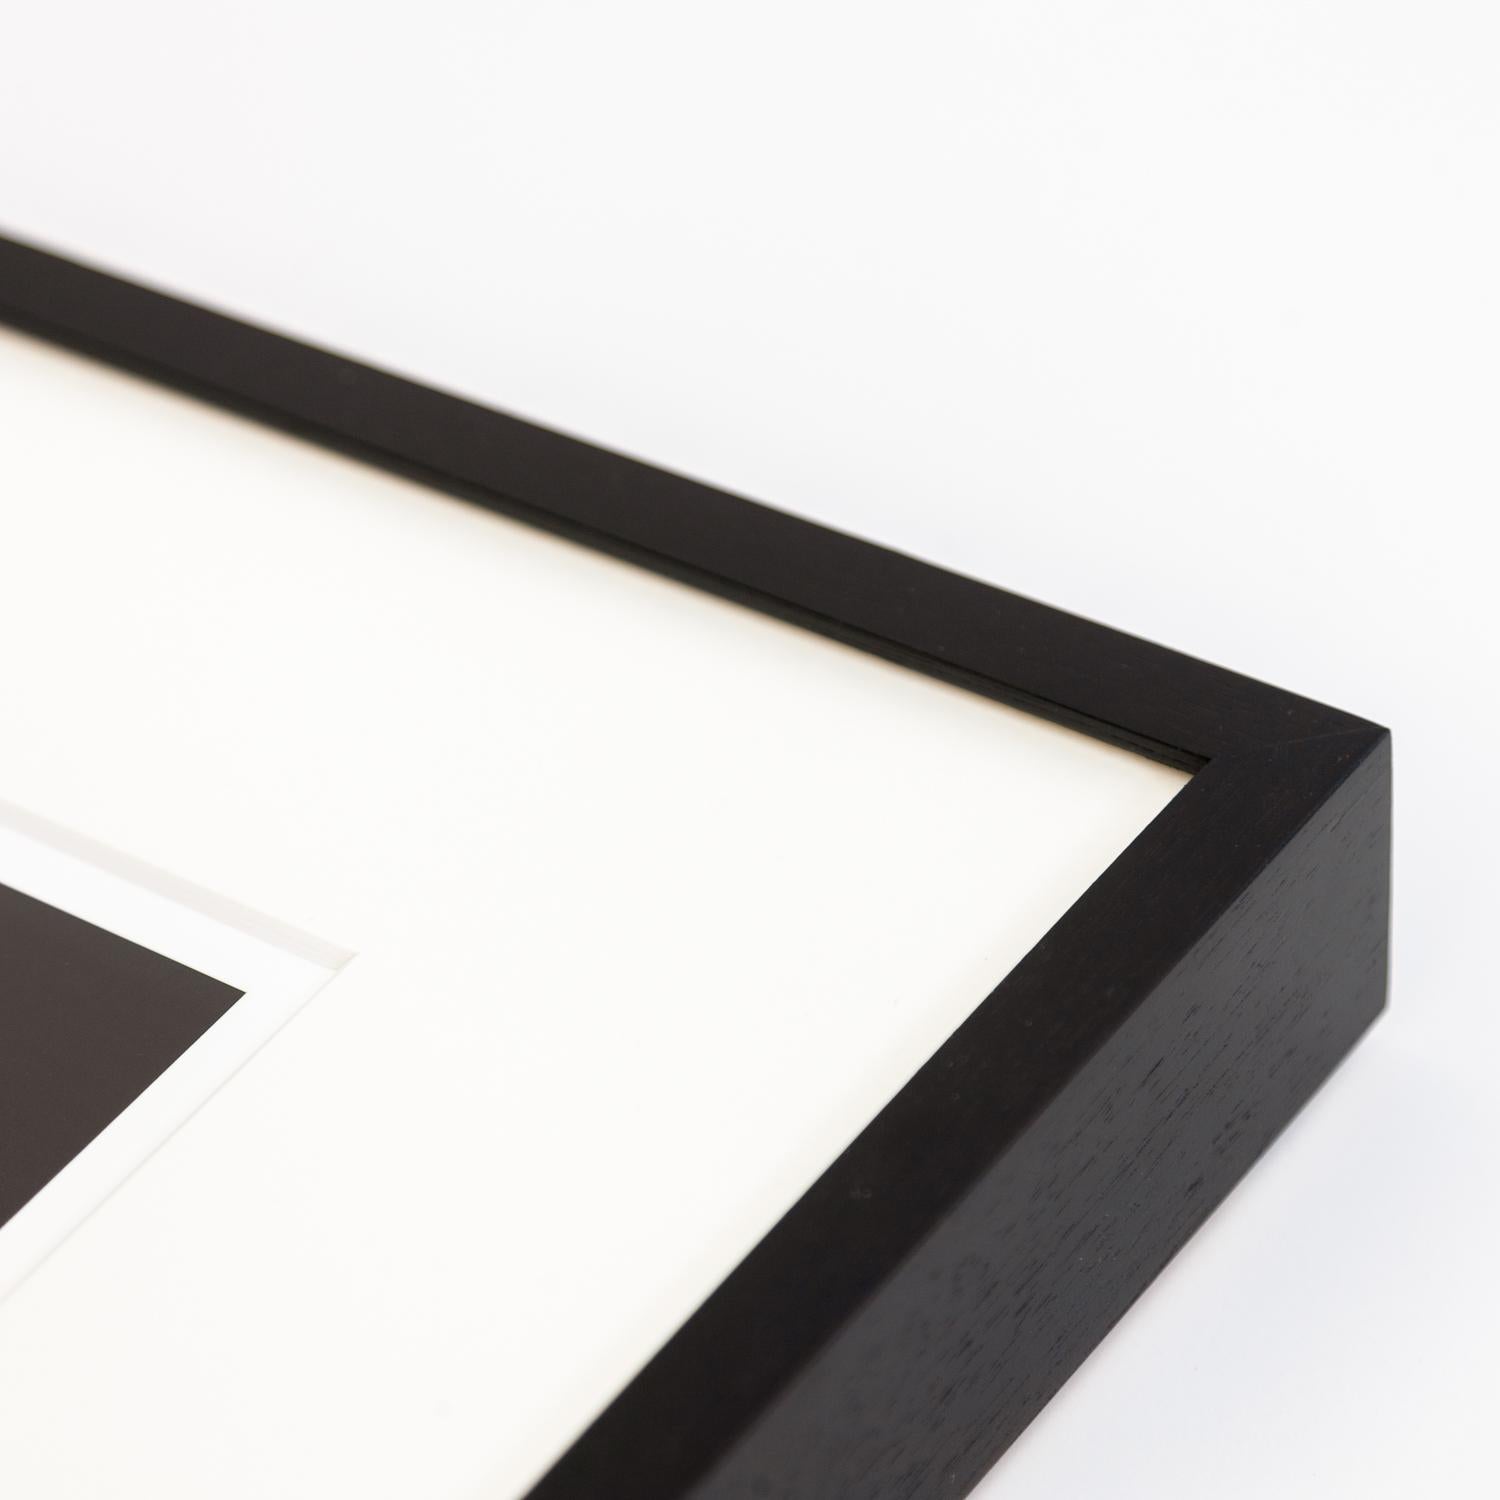 Gerald Berghammer - Limited Edition 1/9
Archival Pigment Ink Print, Printed 2021
Signed, numbered, dated by Artis.
Handmade wood frame, black, natural white archival Passepartout, anti-reflection white glass, UV 70, metal corners for wall